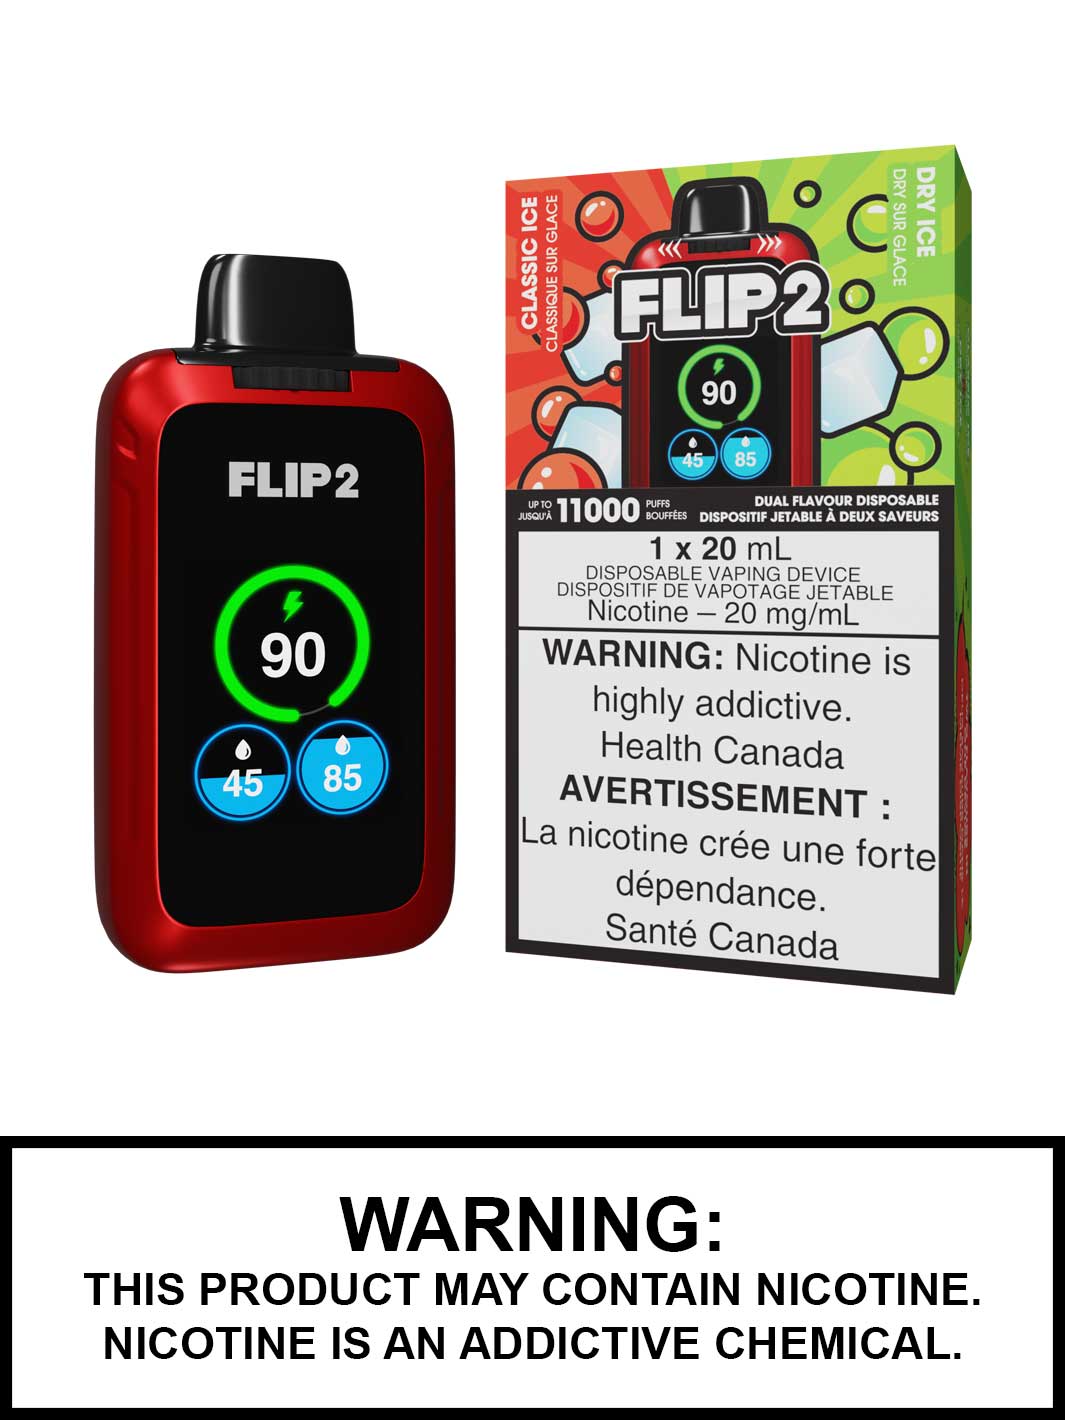 Classic Ice and Dry Ice Flip 2 Disposable Vape by Flip Bar, Vape360 Canada